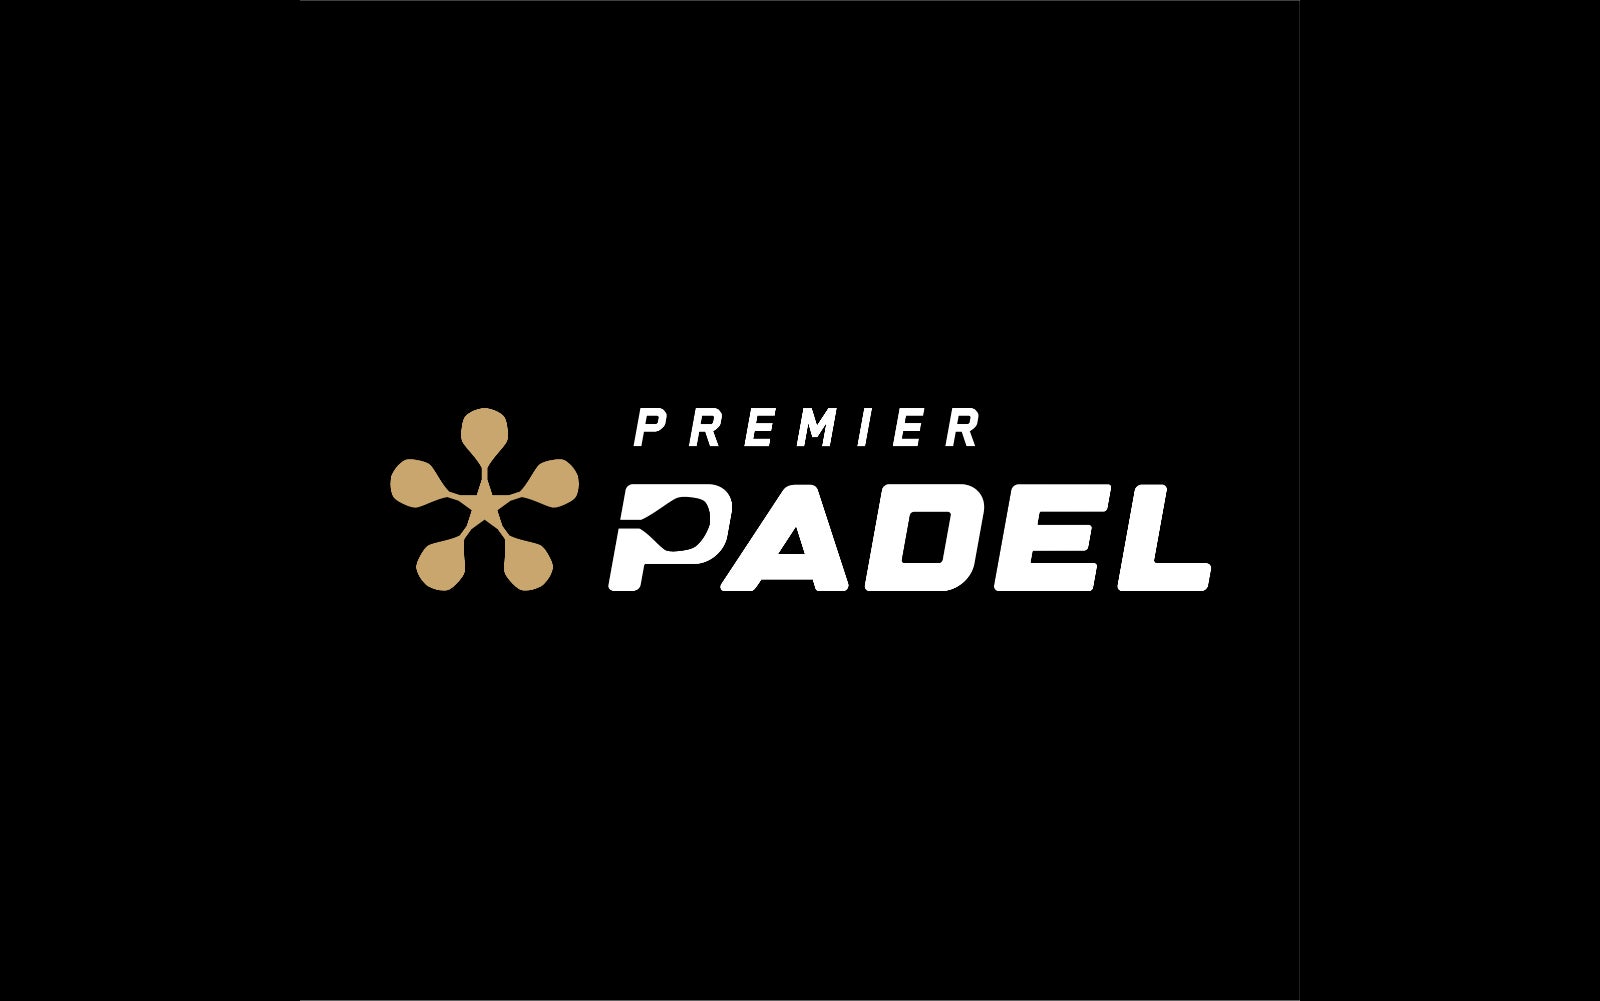 BeIN to show Premier Padel in 37 countries - Sportcal